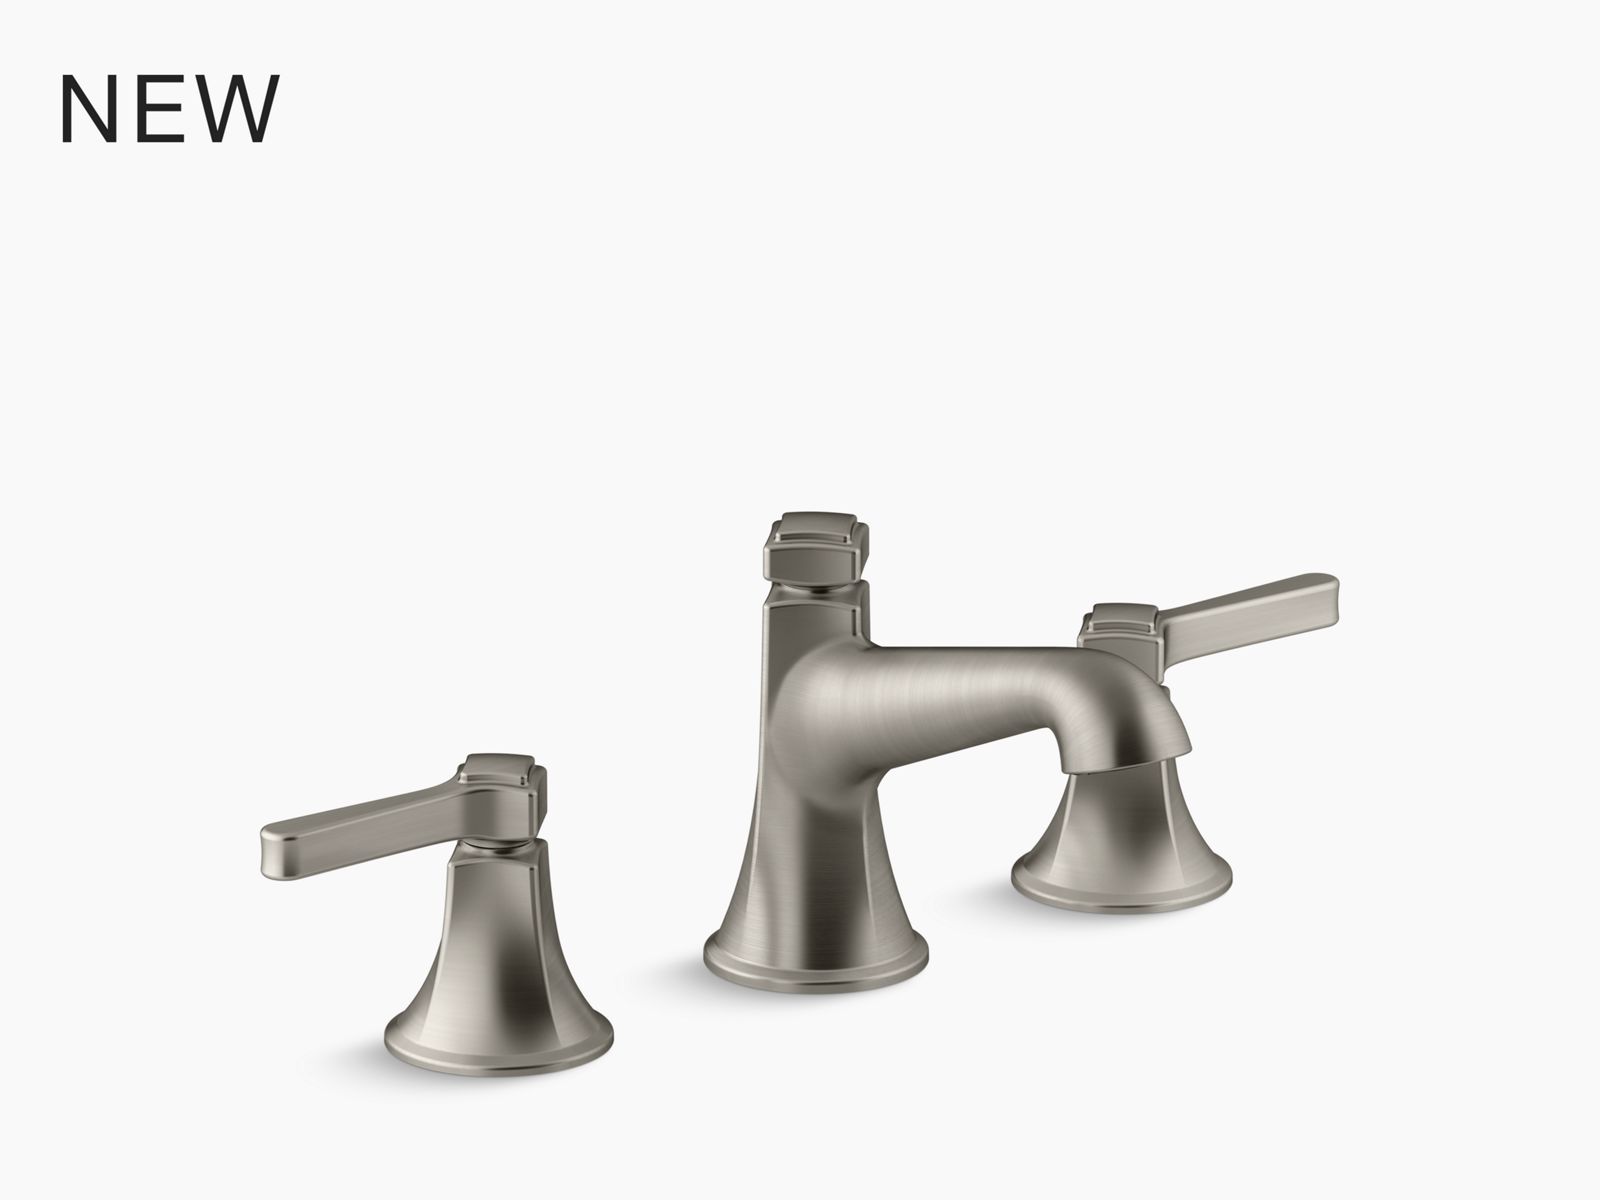 Bathroom sink faucet with ergonomic cross handles and pillow-top detailing